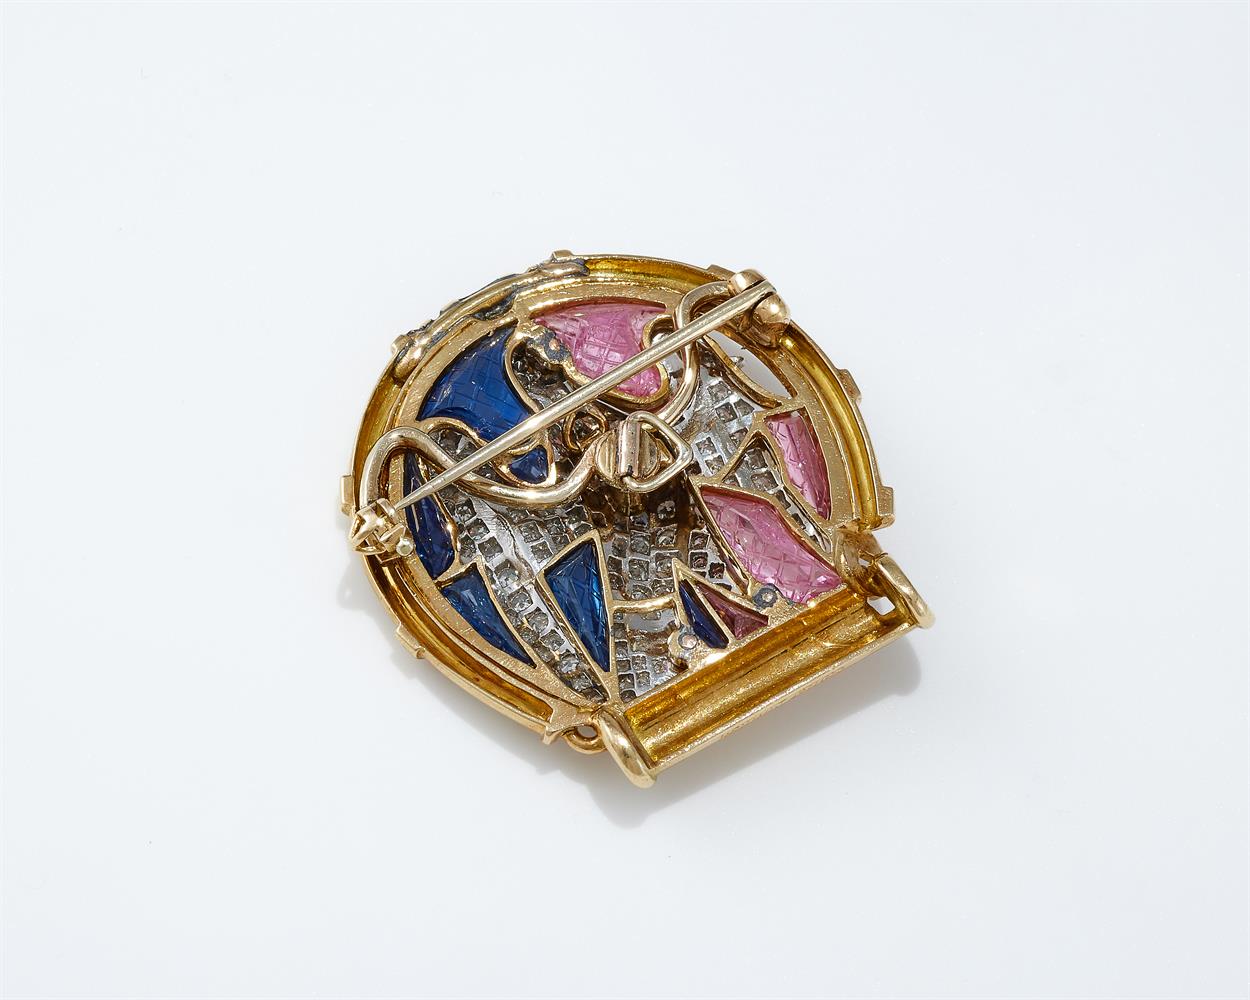 CARTIER, THE 'ELTHAM PALACE' DIAMOND AND GEM SET BROOCHES - Image 5 of 7